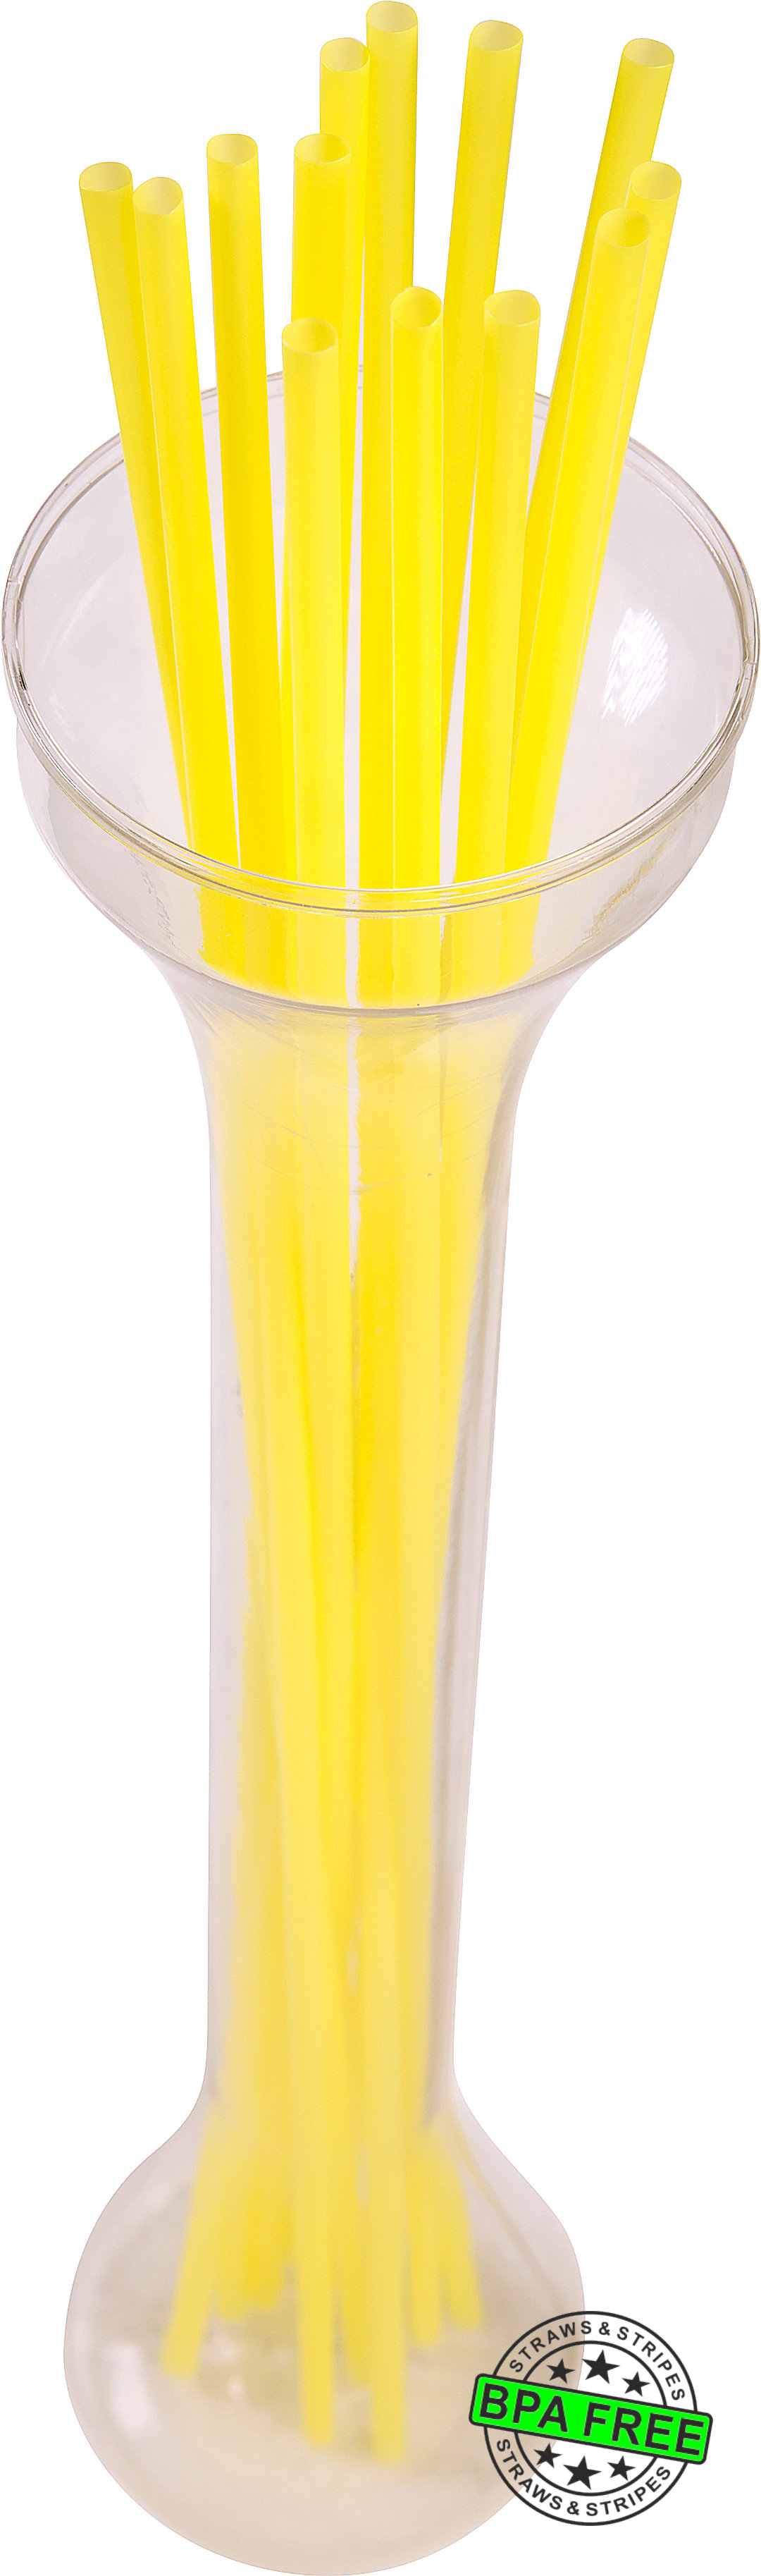 1 CASE - 3,500 (35x100) EXTRA LONG drinking straws 18.00 x 0.21 inch - color: yellow